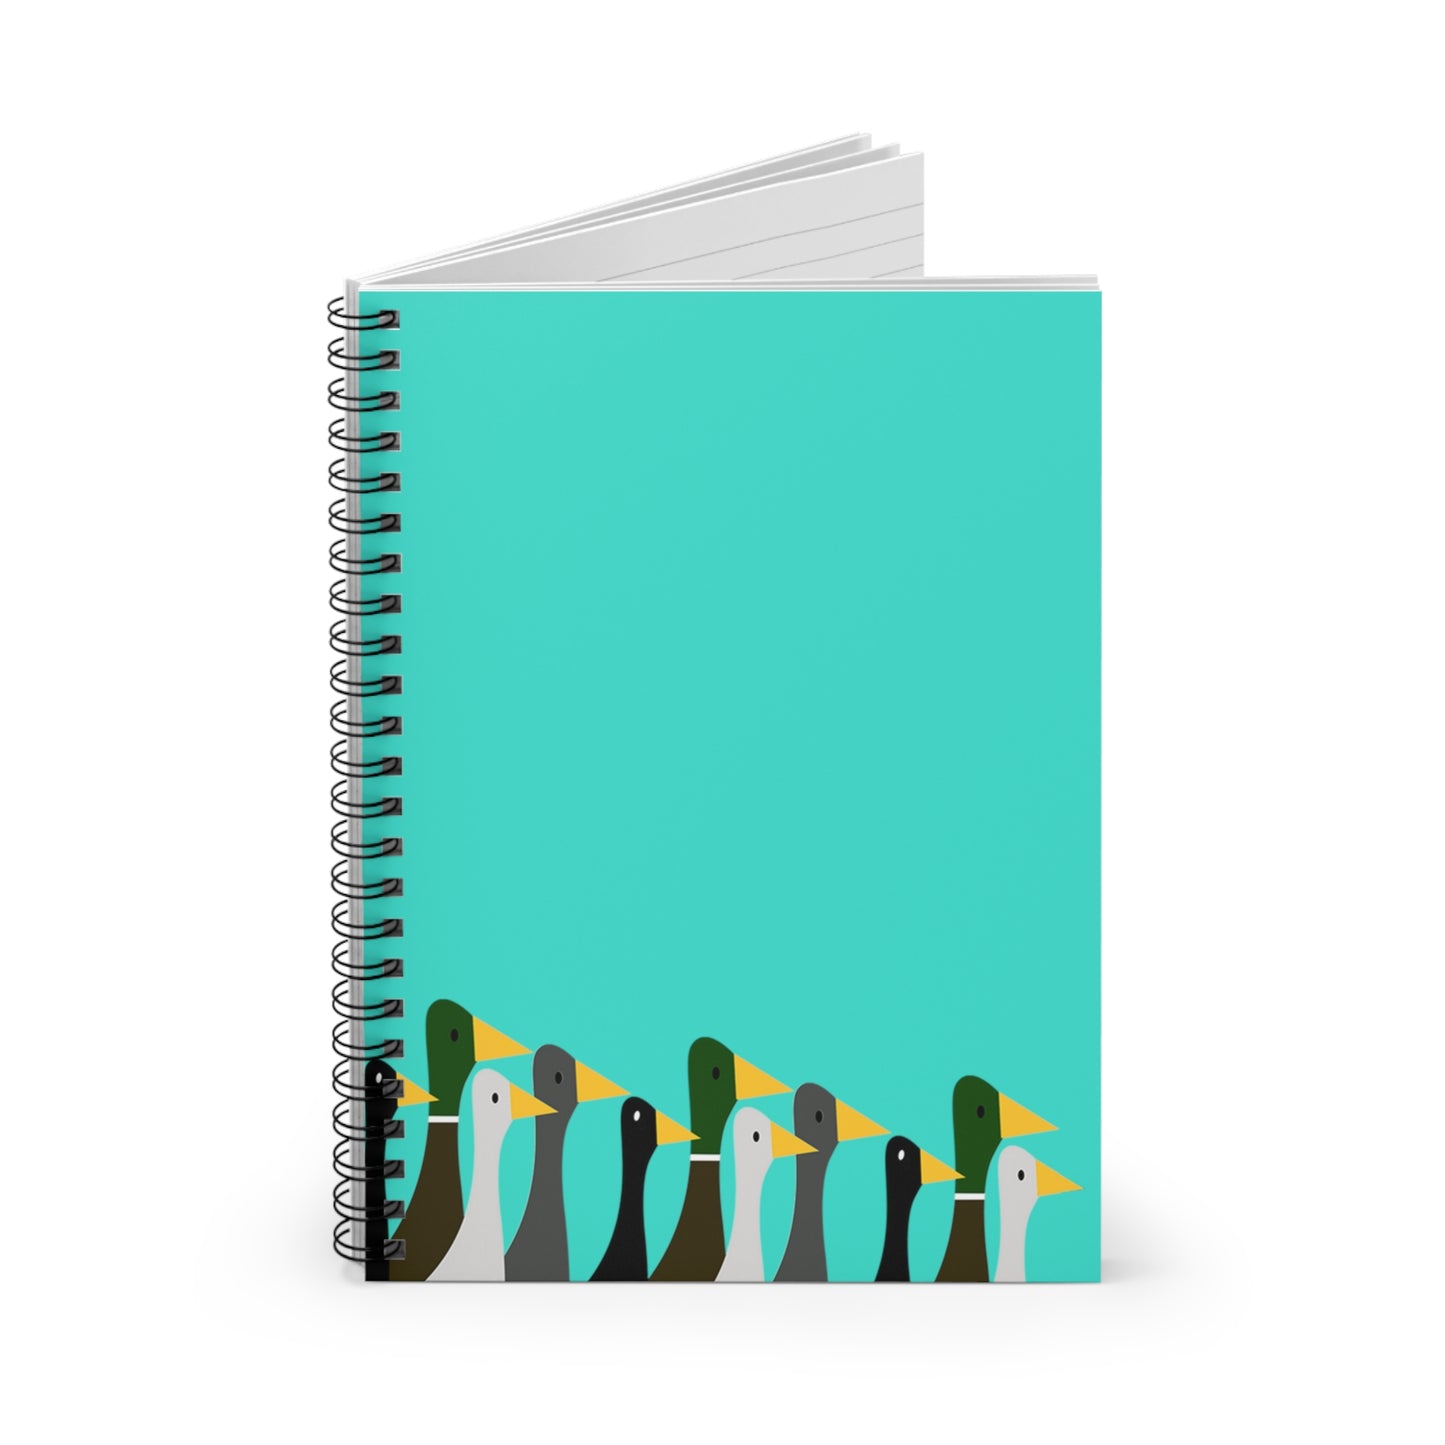 Marching Ducks - Turquoise 40E0D0 - Spiral Notebook - Ruled Line